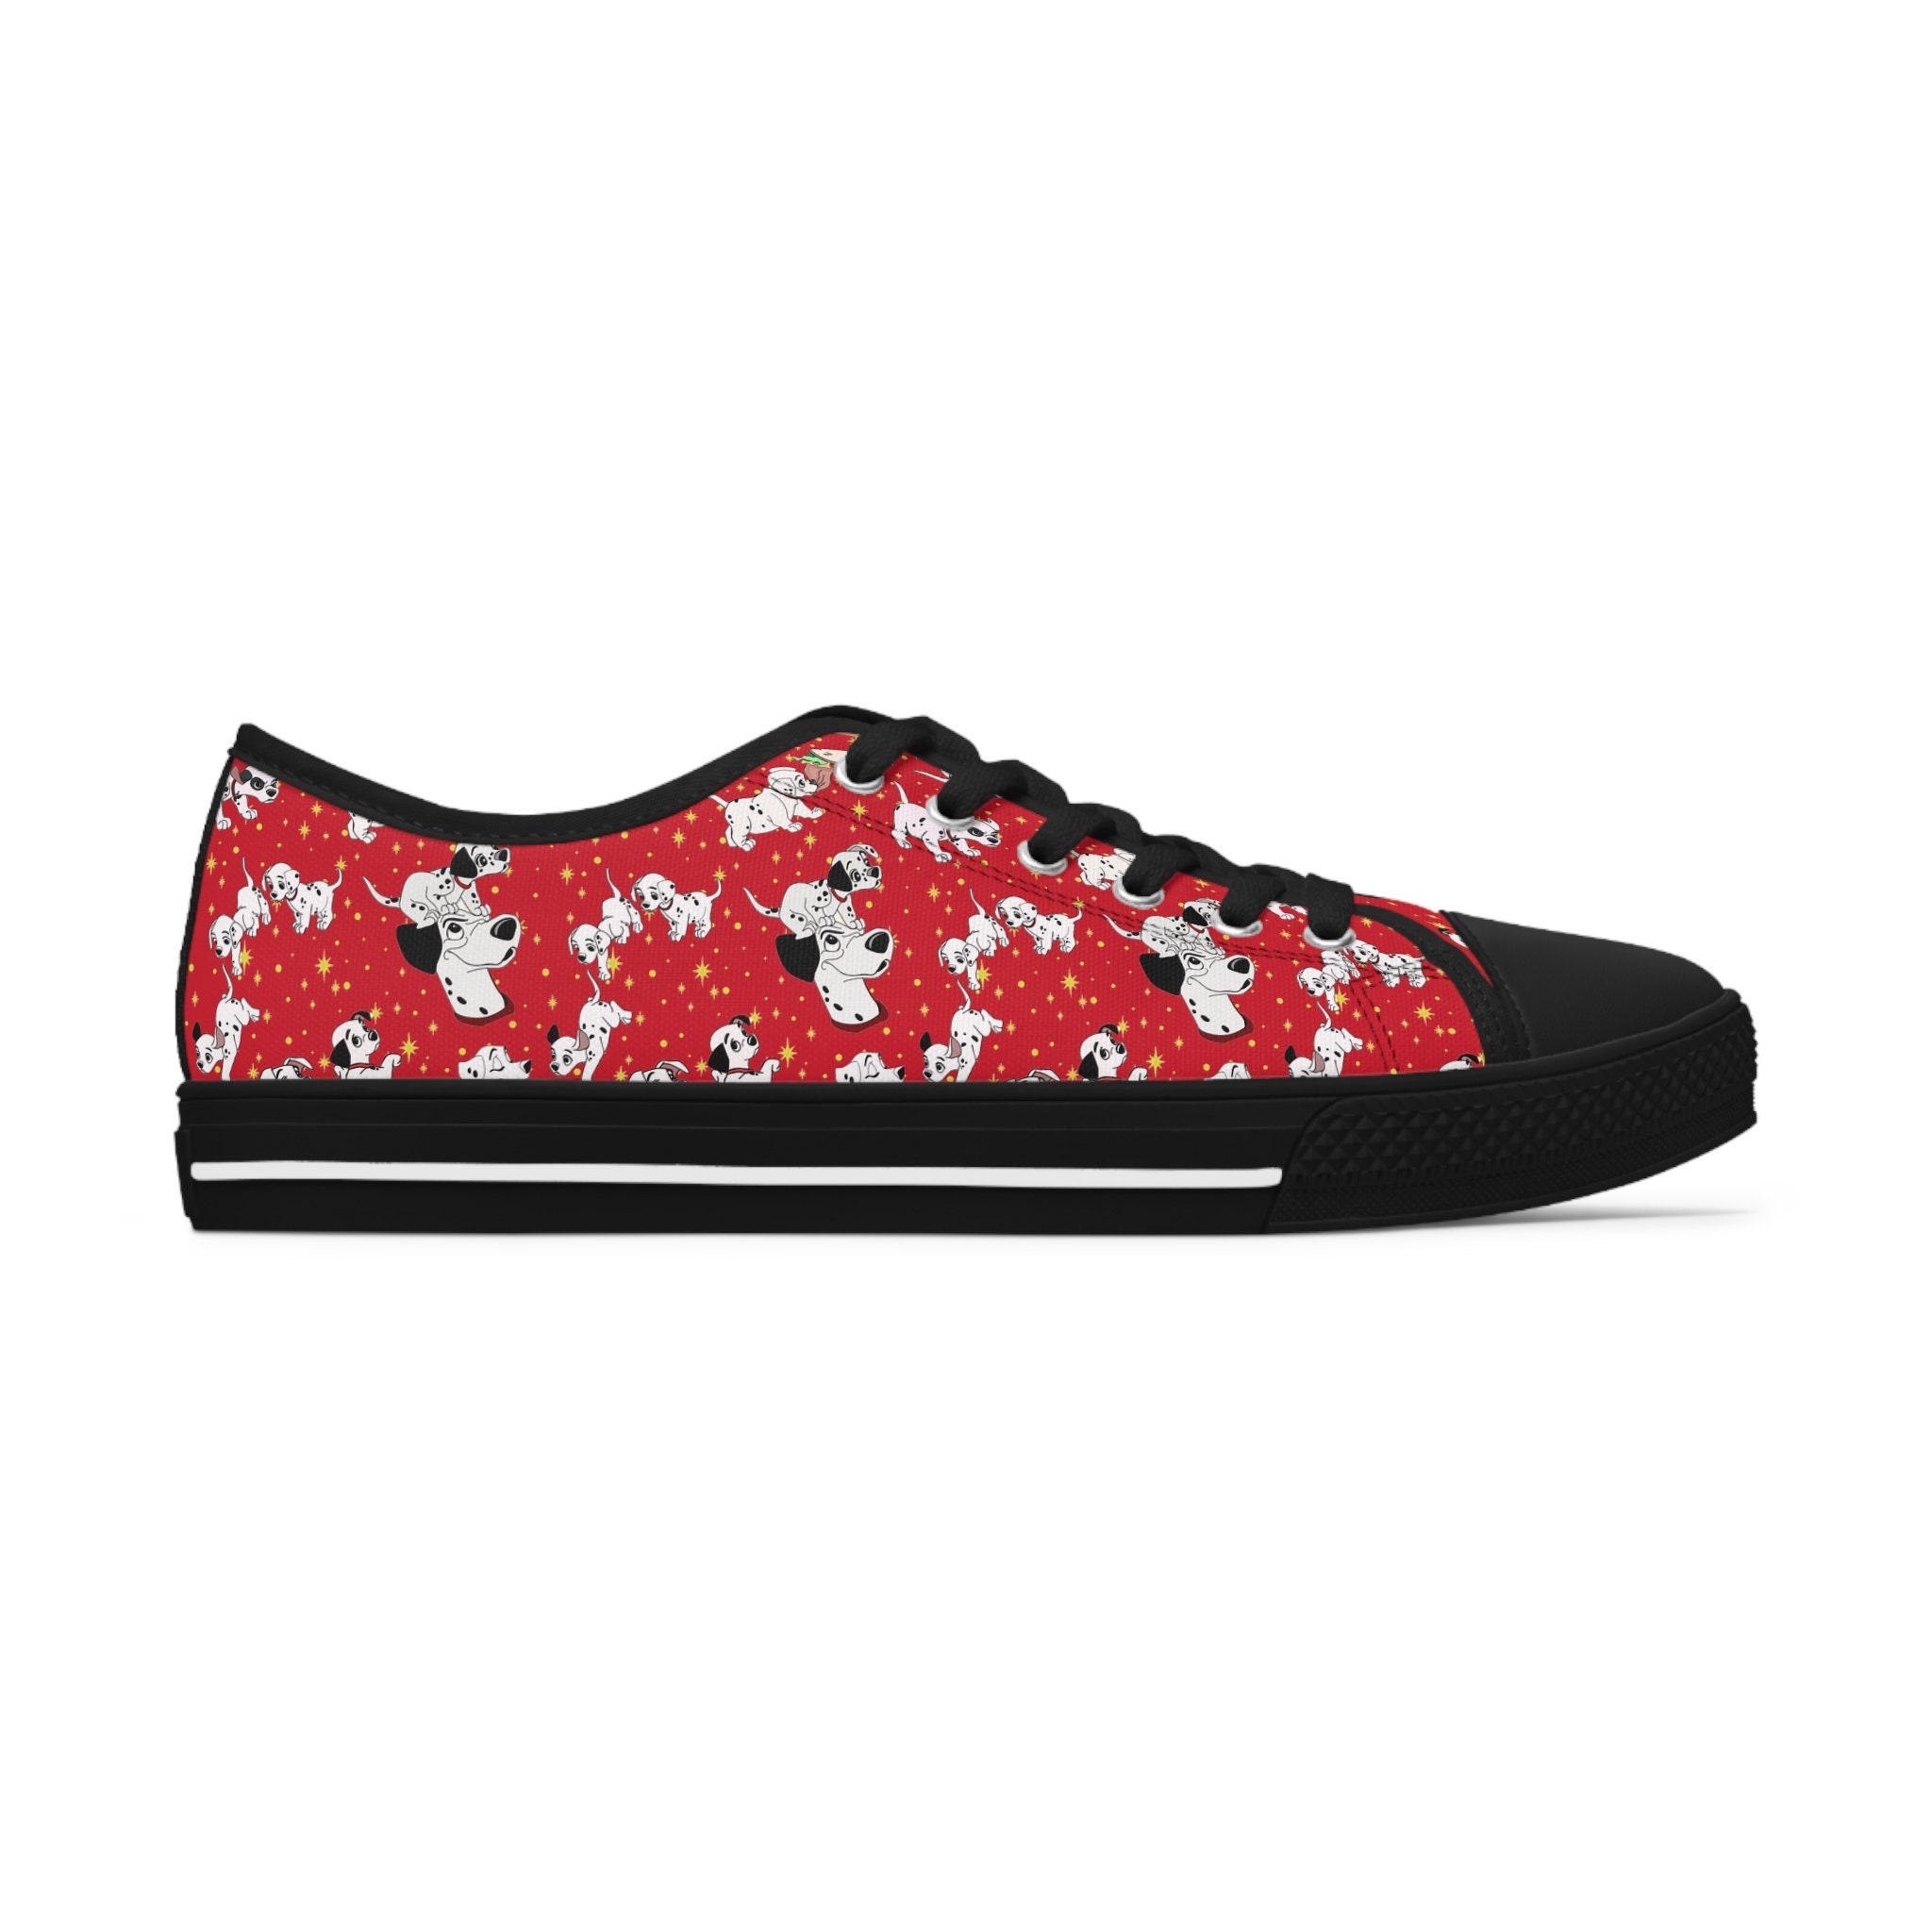 Discover Disney 101 Dalmations Customized Women's Low Top Sneakers